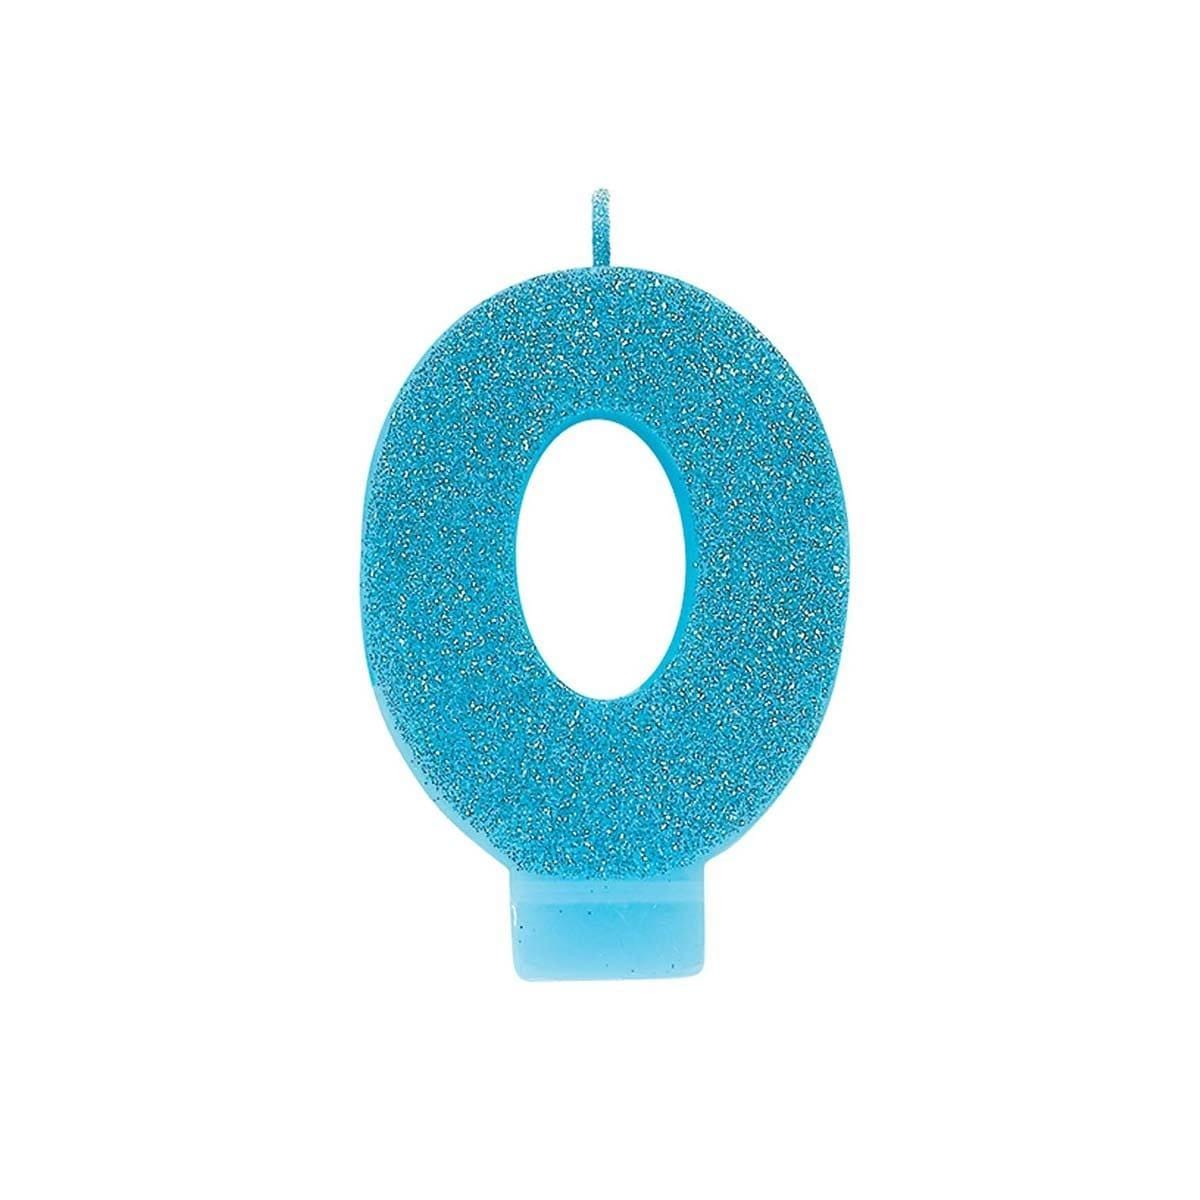 Buy Cake Supplies Numeral Glitter Candle #0 - Caribbean Blue sold at Party Expert